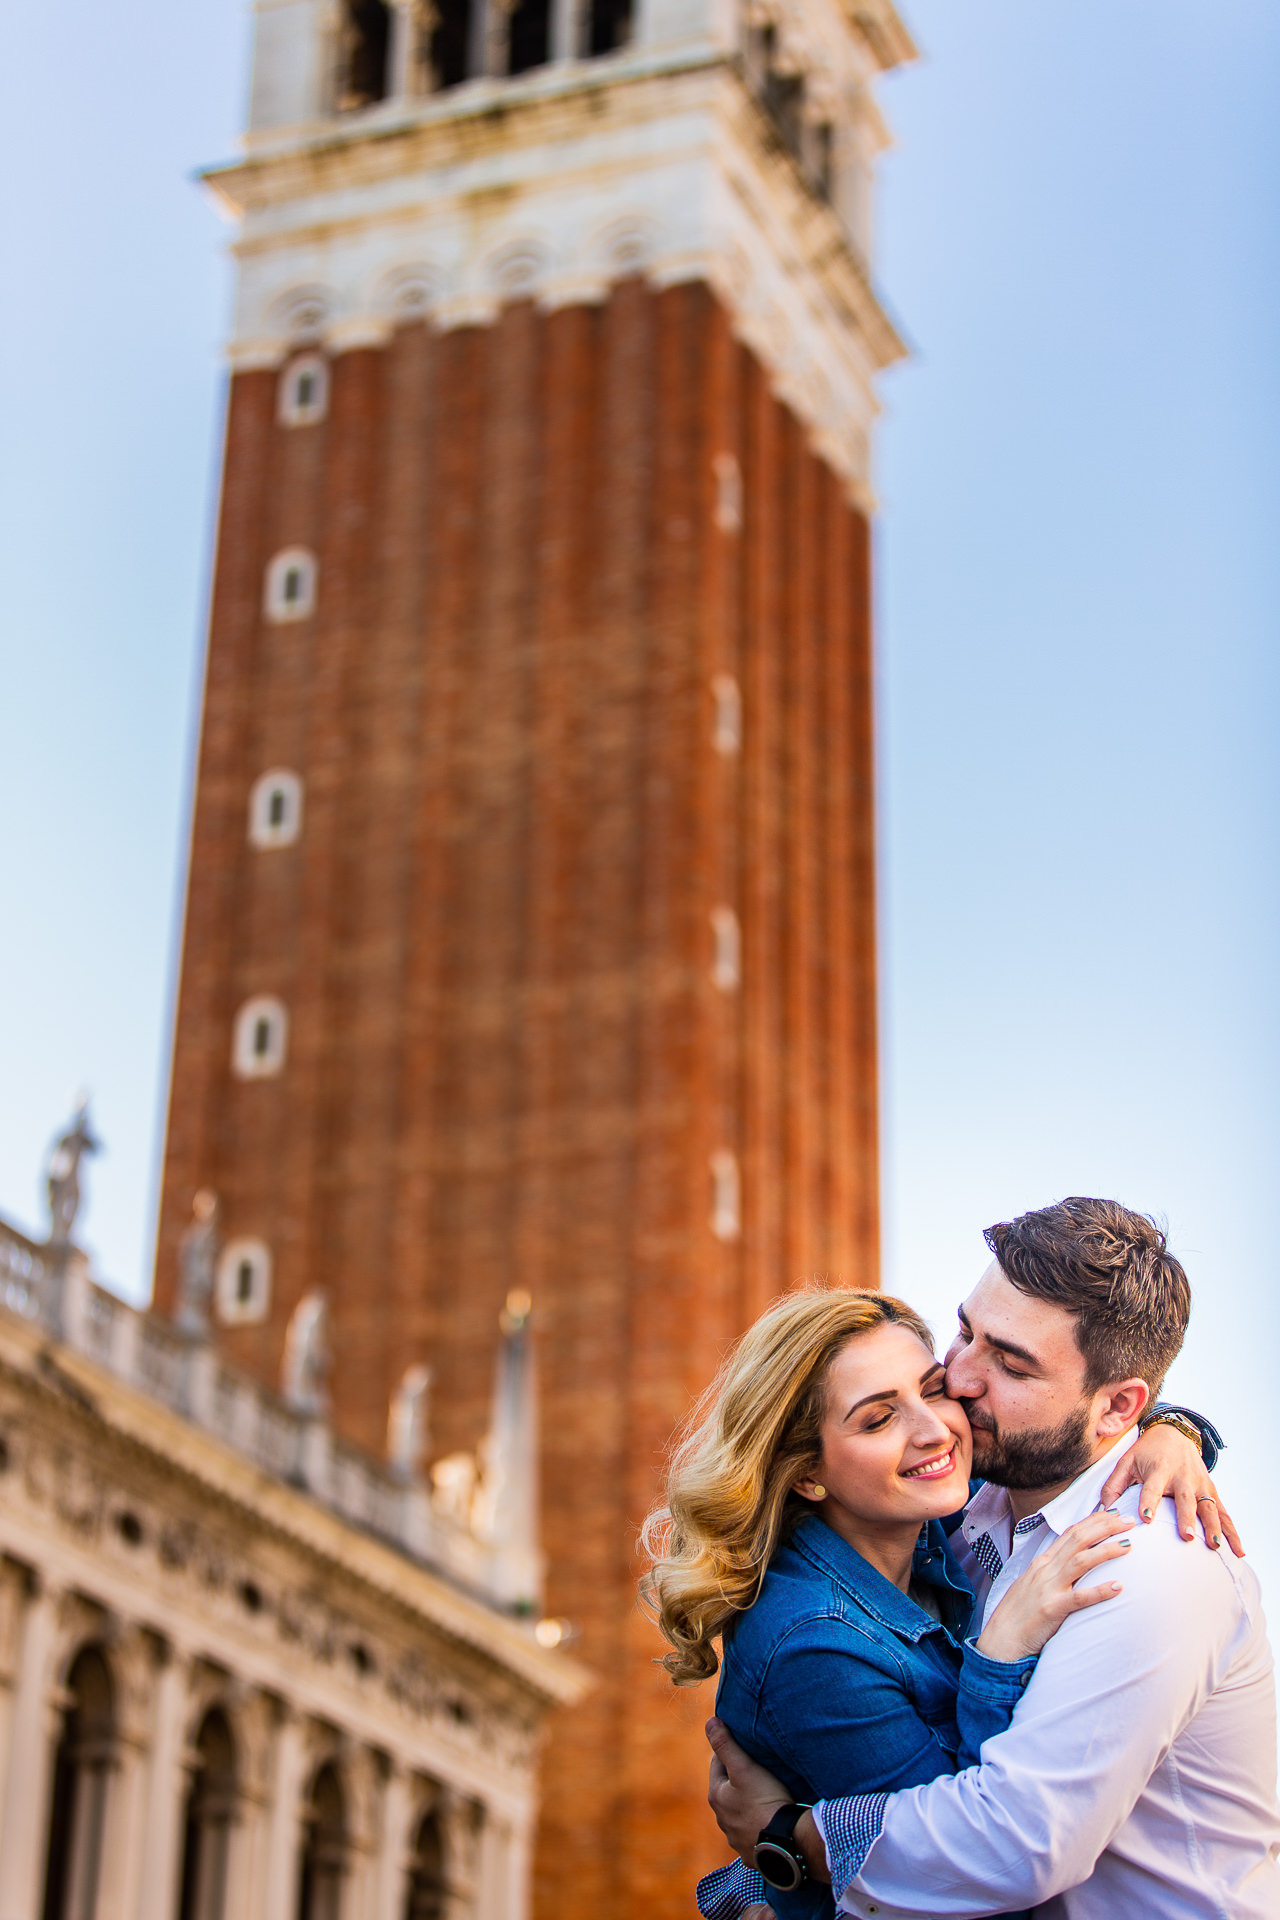 Couple photo session in Venice, Italy with Raluca + Costin by Destination Wedding Photographer Mihai Zaharia02